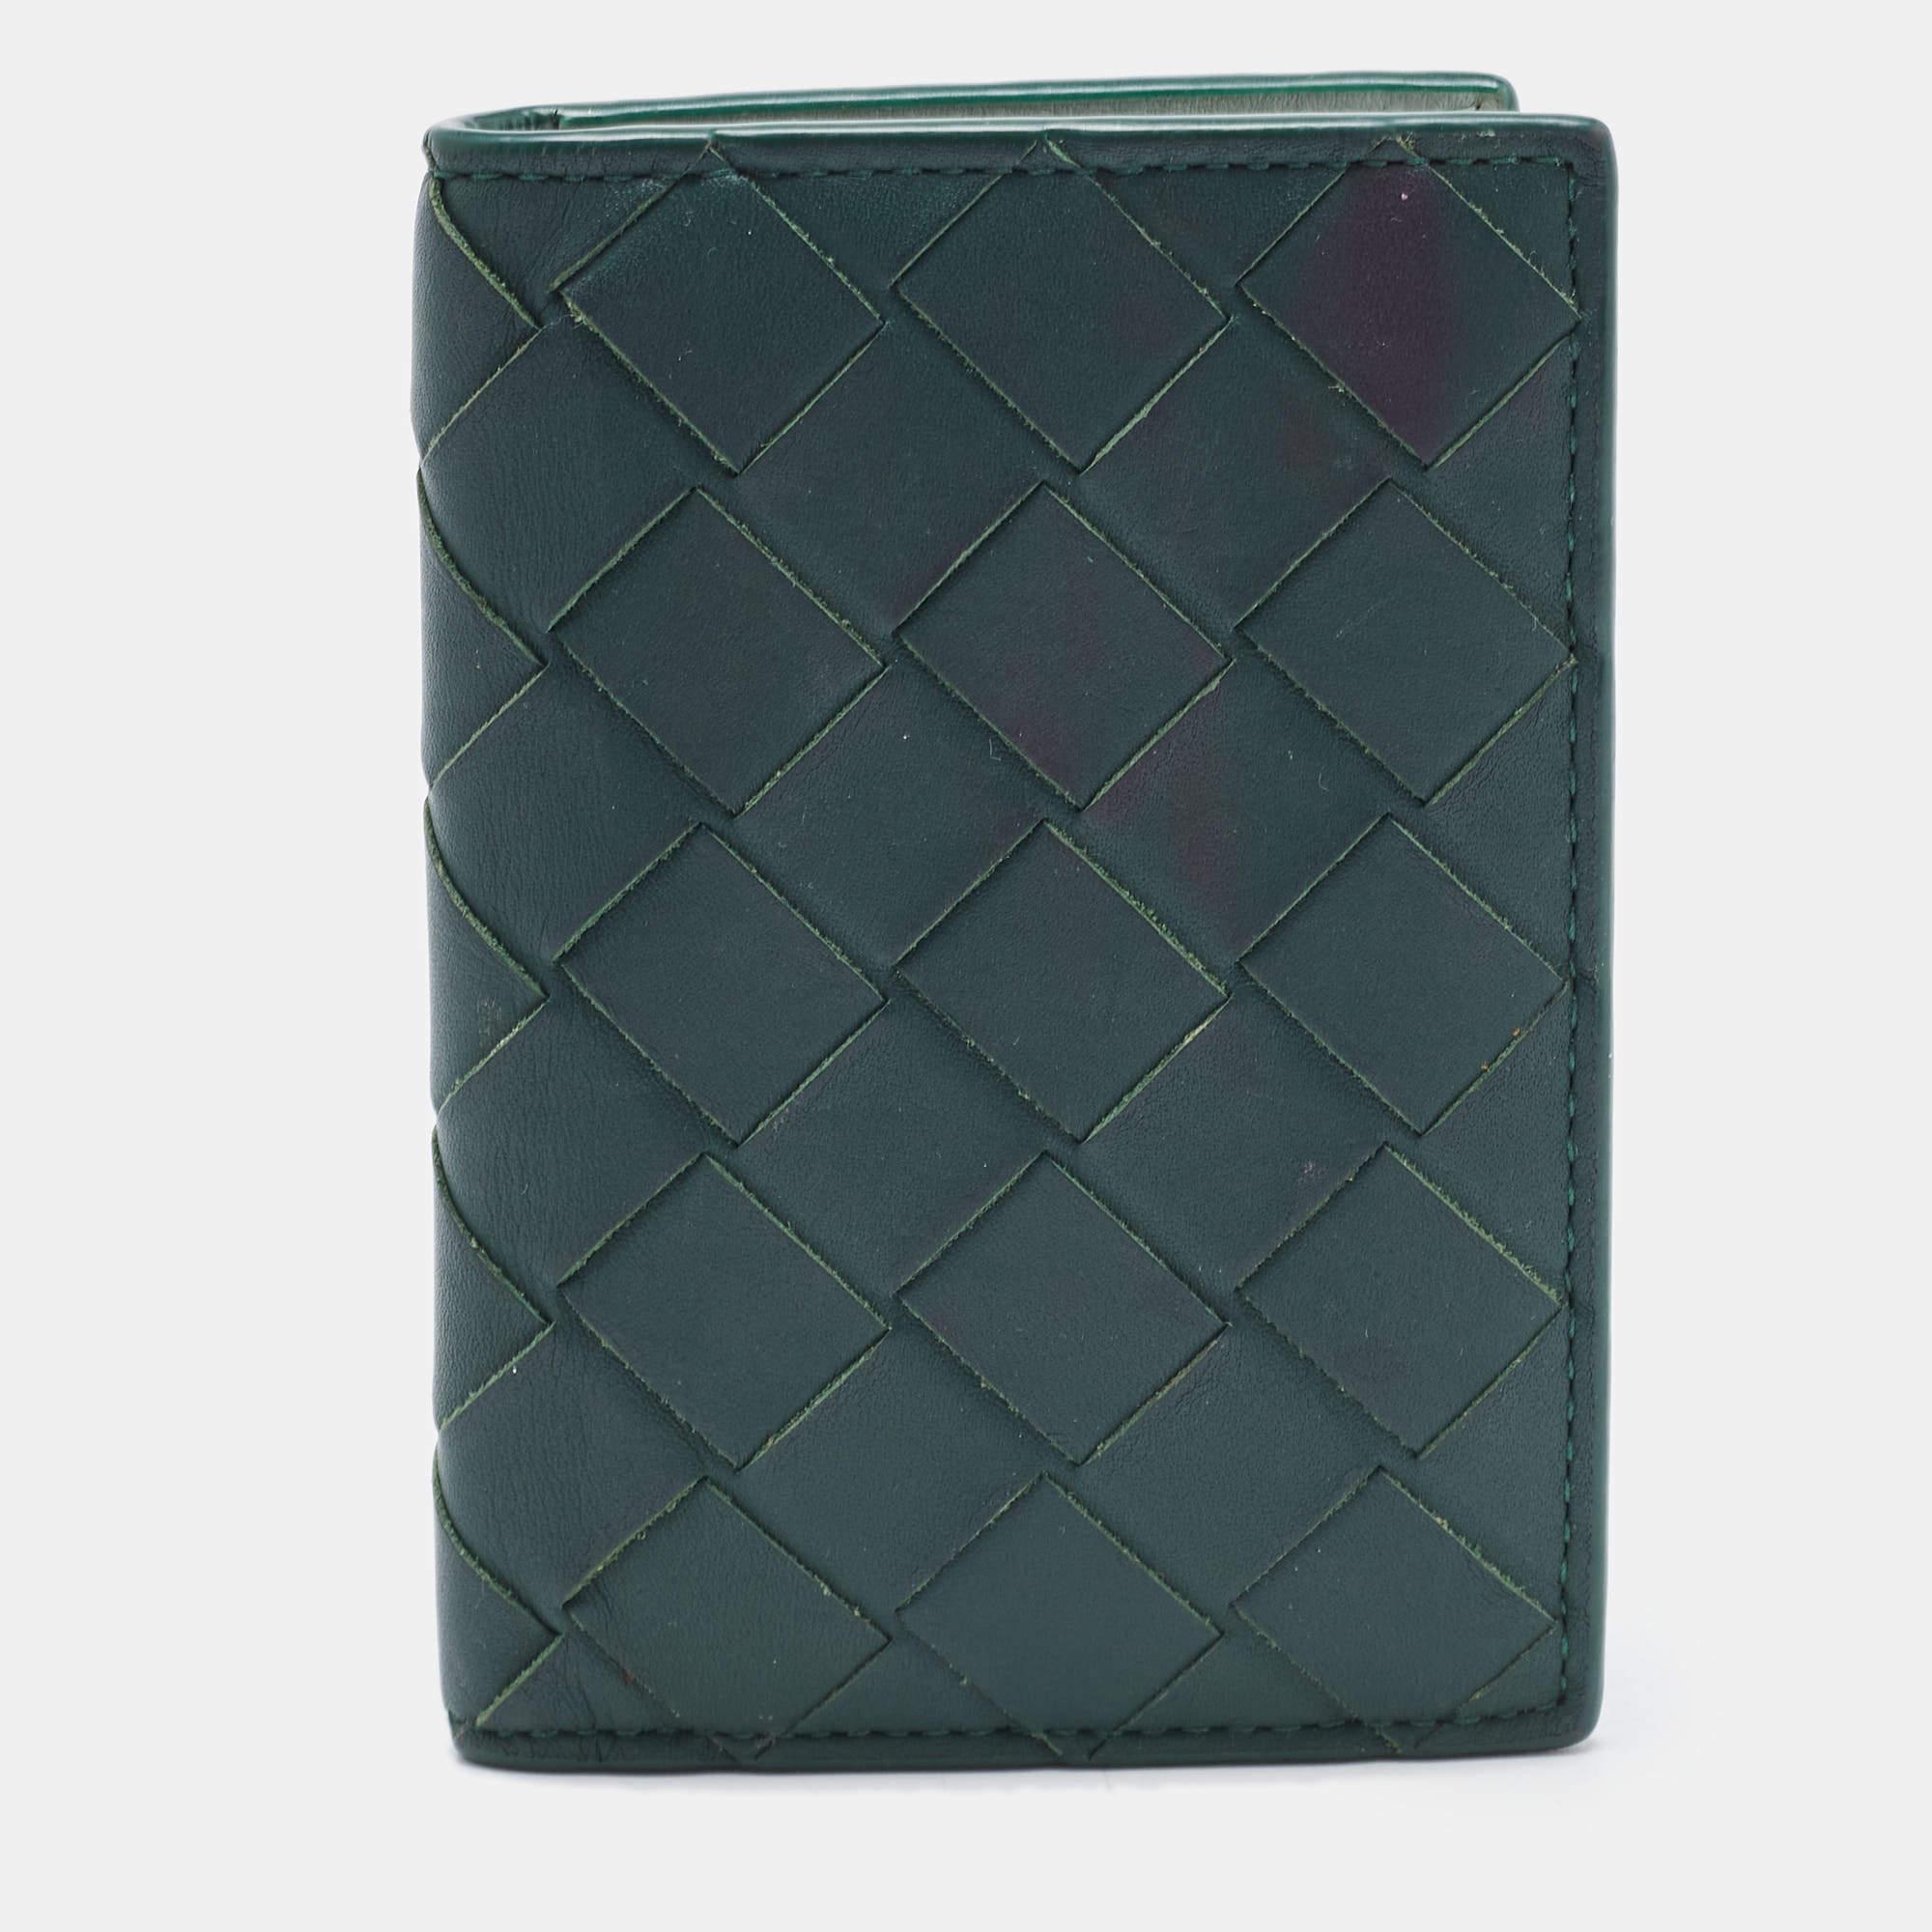 Crafted from fine-quality leather, this cardholder will be your go-to accessory. Equipped with multiple slots, this creation from Bottega Veneta is stylish and convenient. The Intrecciato pattern coupled with the green shade adds to the look of the